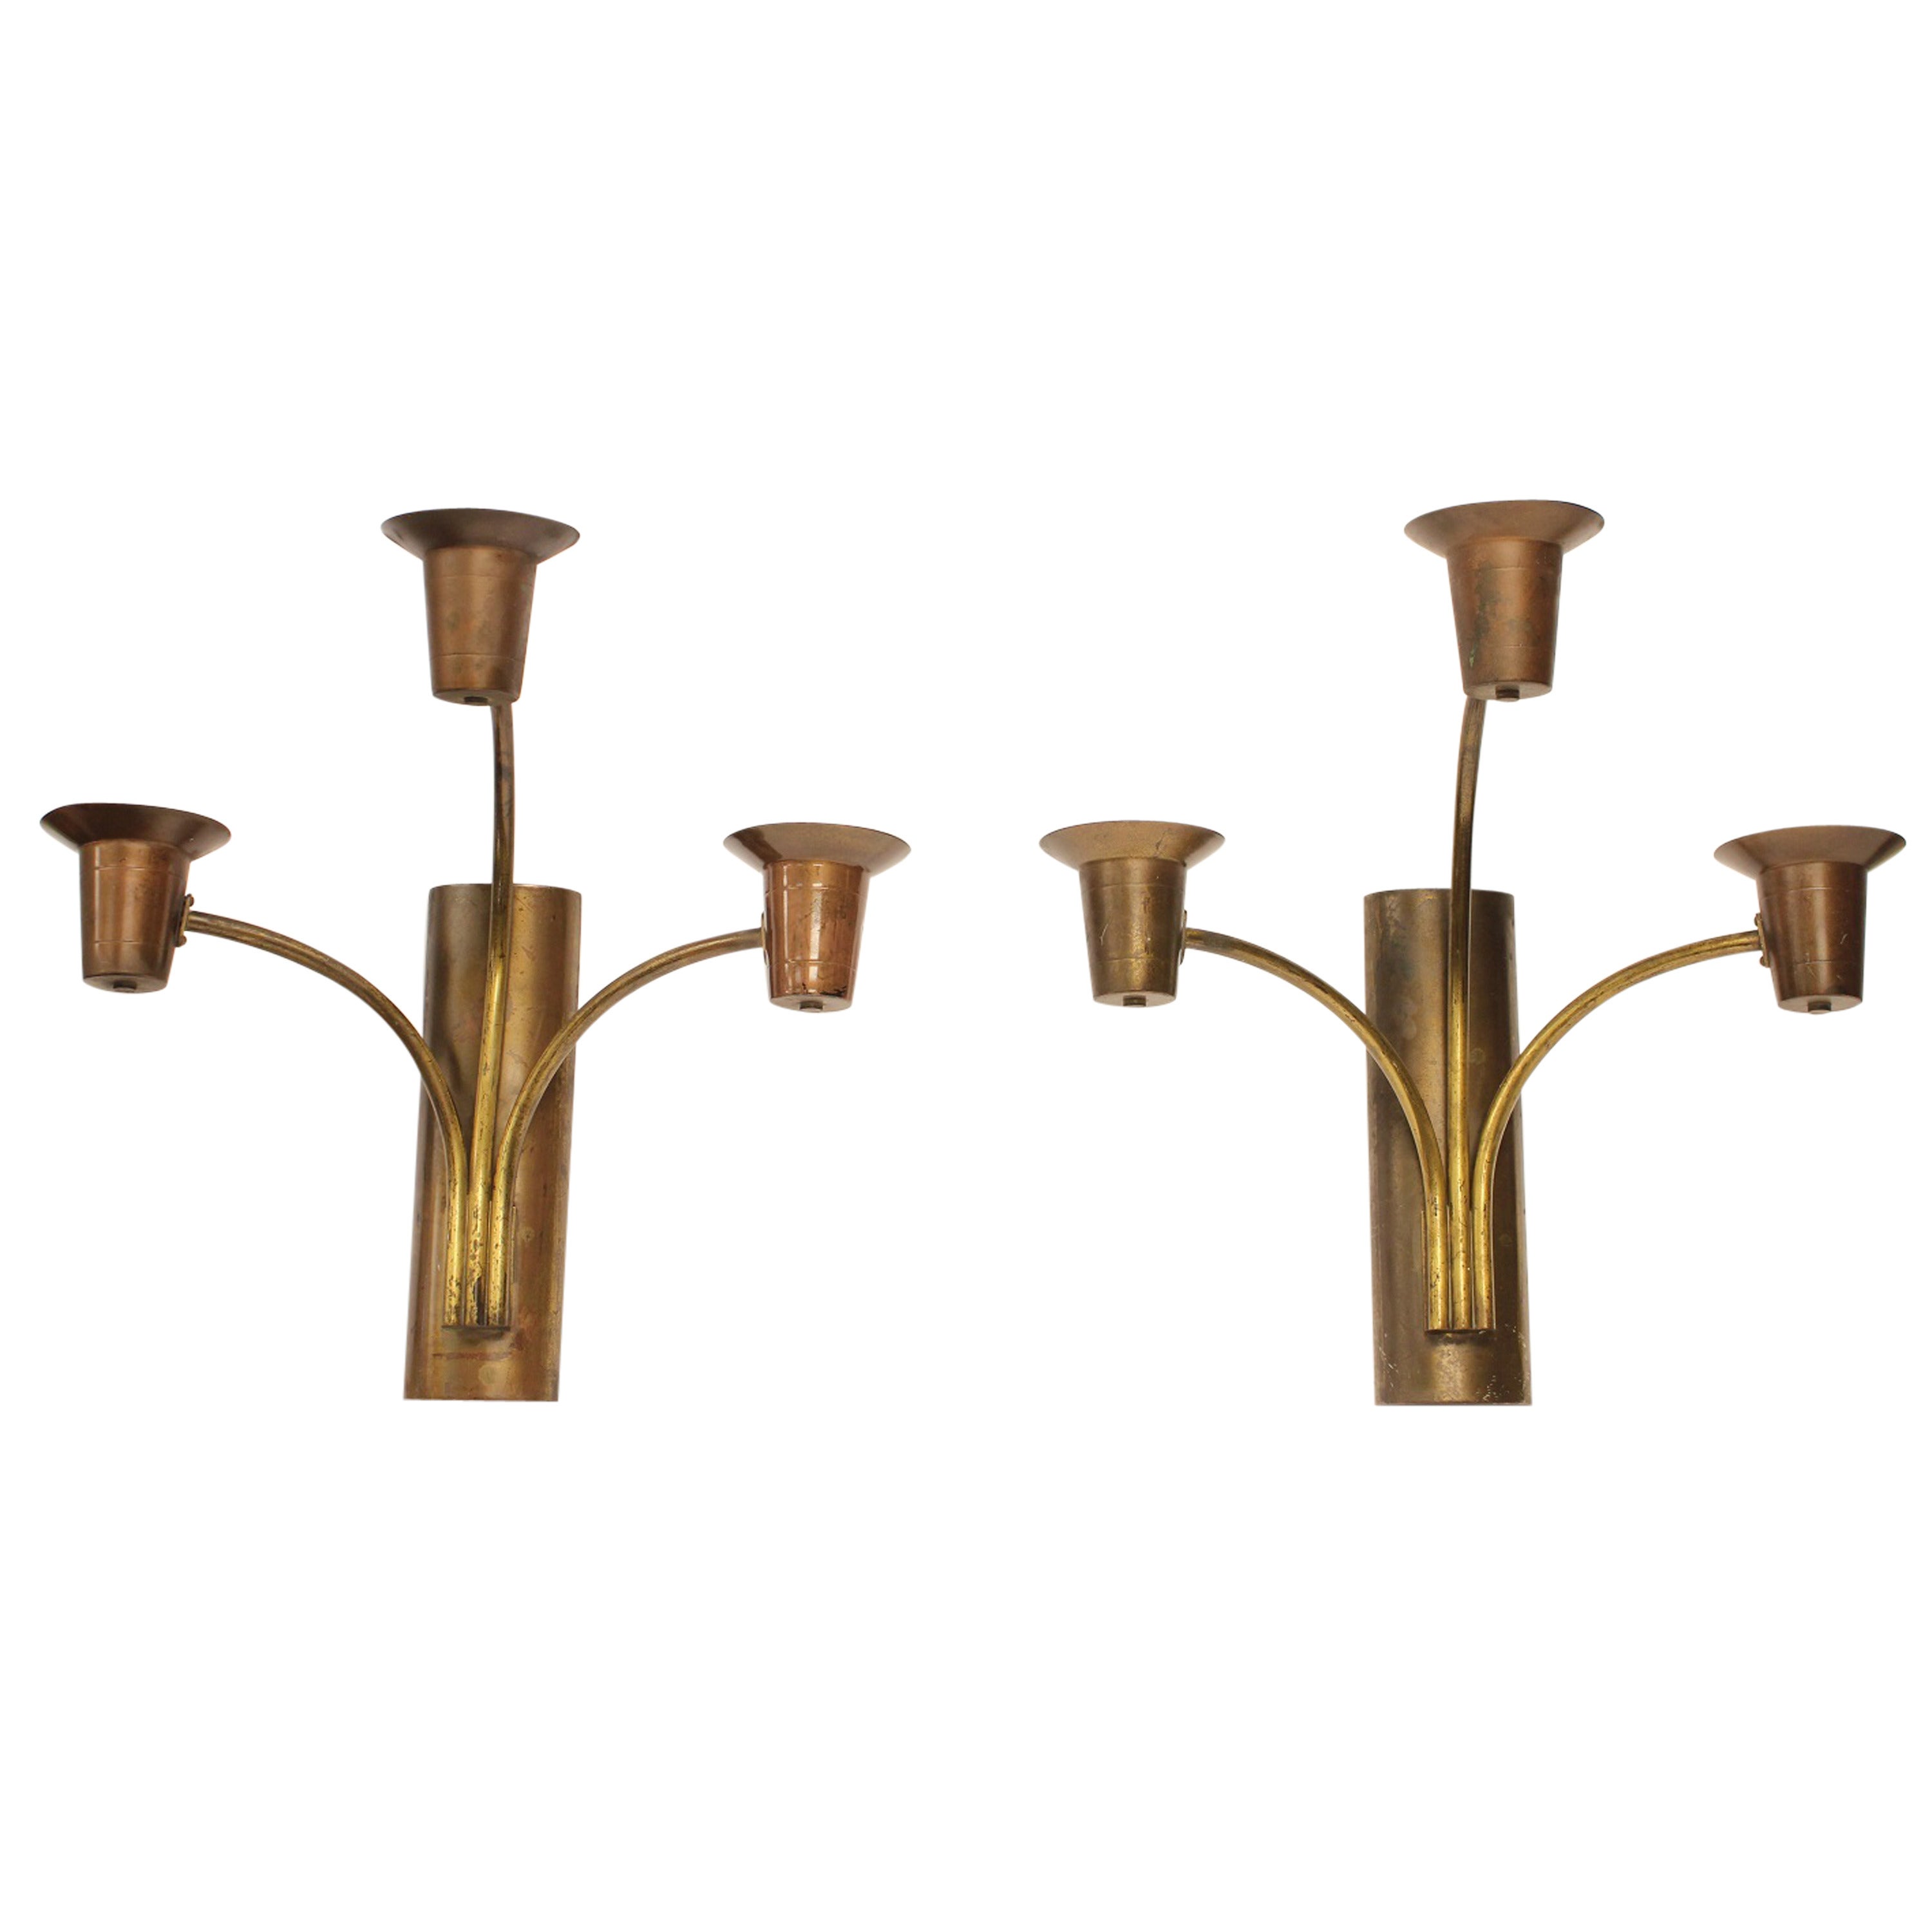 Large 1930s Brass Wall Sconces For Sale